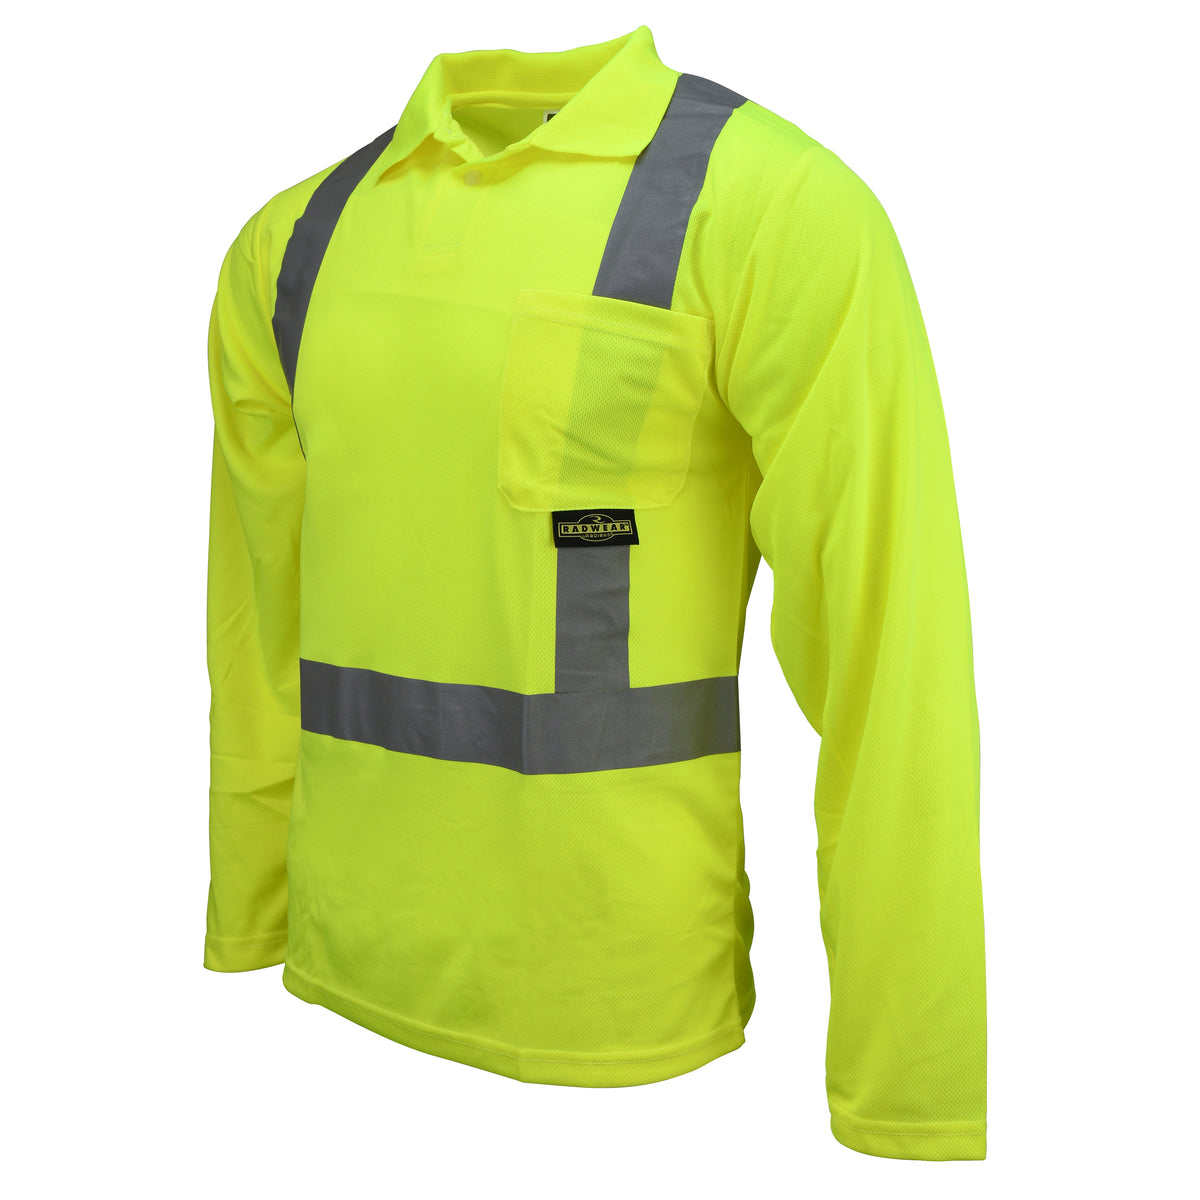 Safety Vests | WRYKER Construction Supply